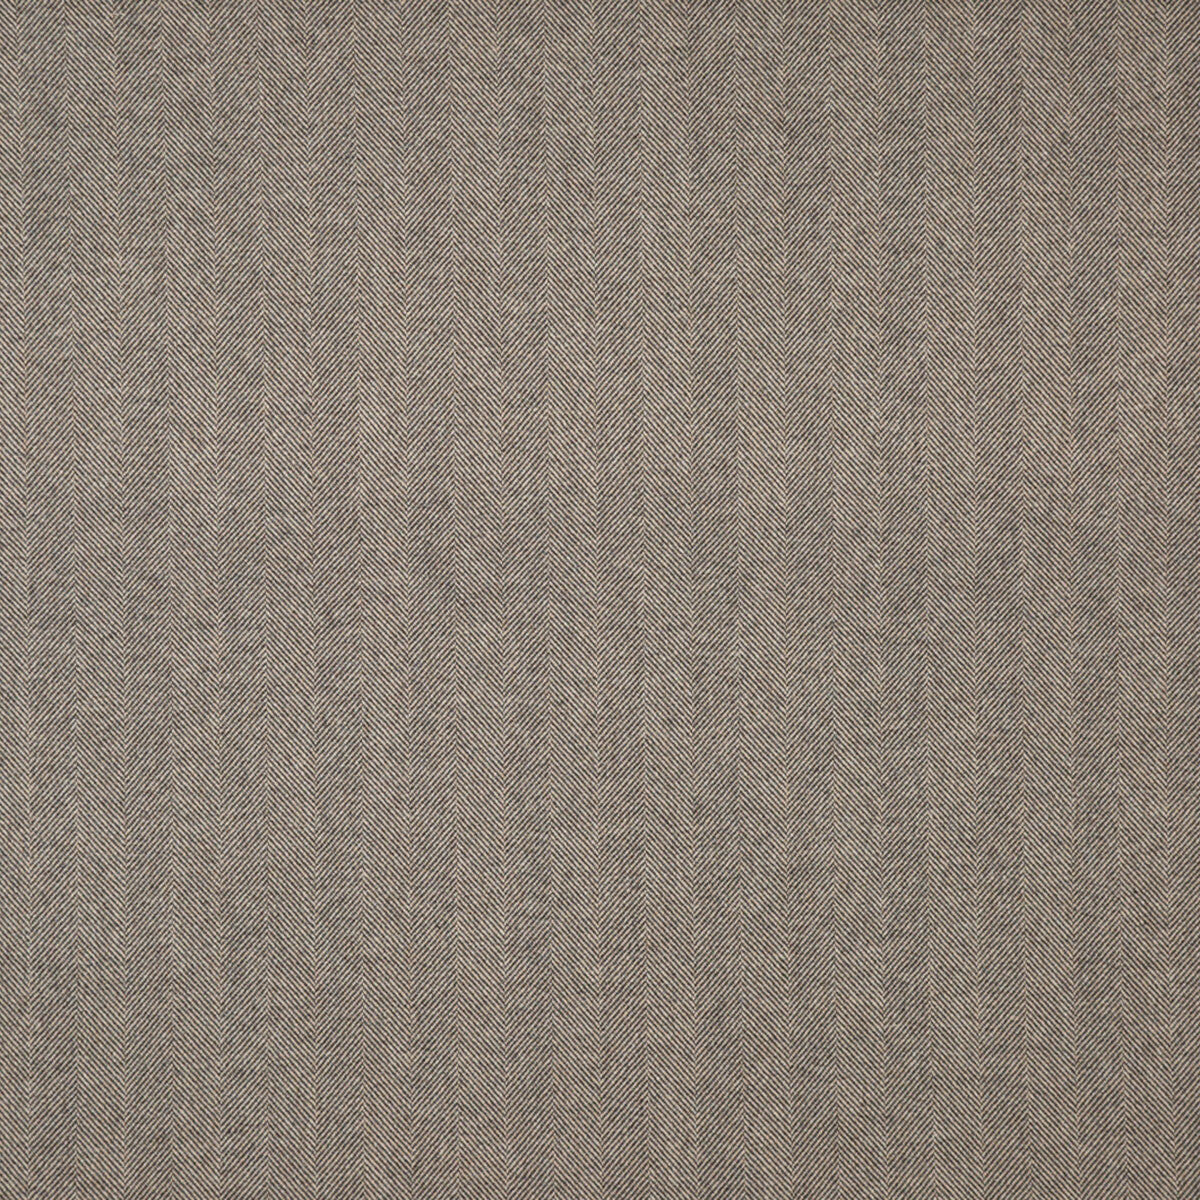 Beauly fabric in granite color - pattern FD701.A16.0 - by Mulberry in the Bohemian Romance collection